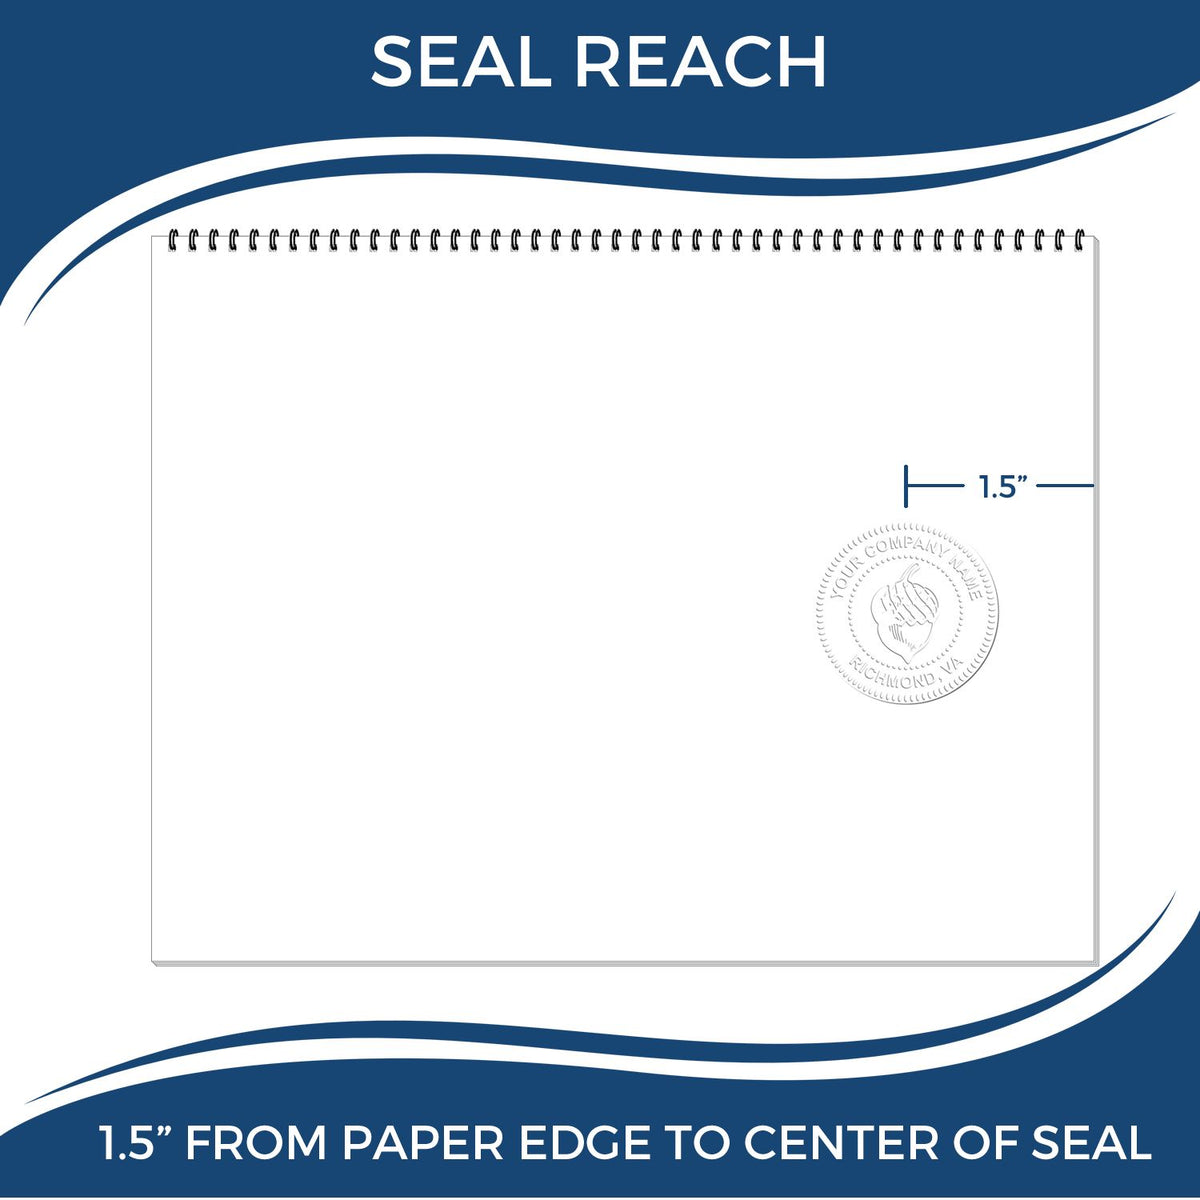 An infographic showing the seal reach which is represented by a ruler and a miniature seal image of the Soft Missouri Professional Engineer Seal